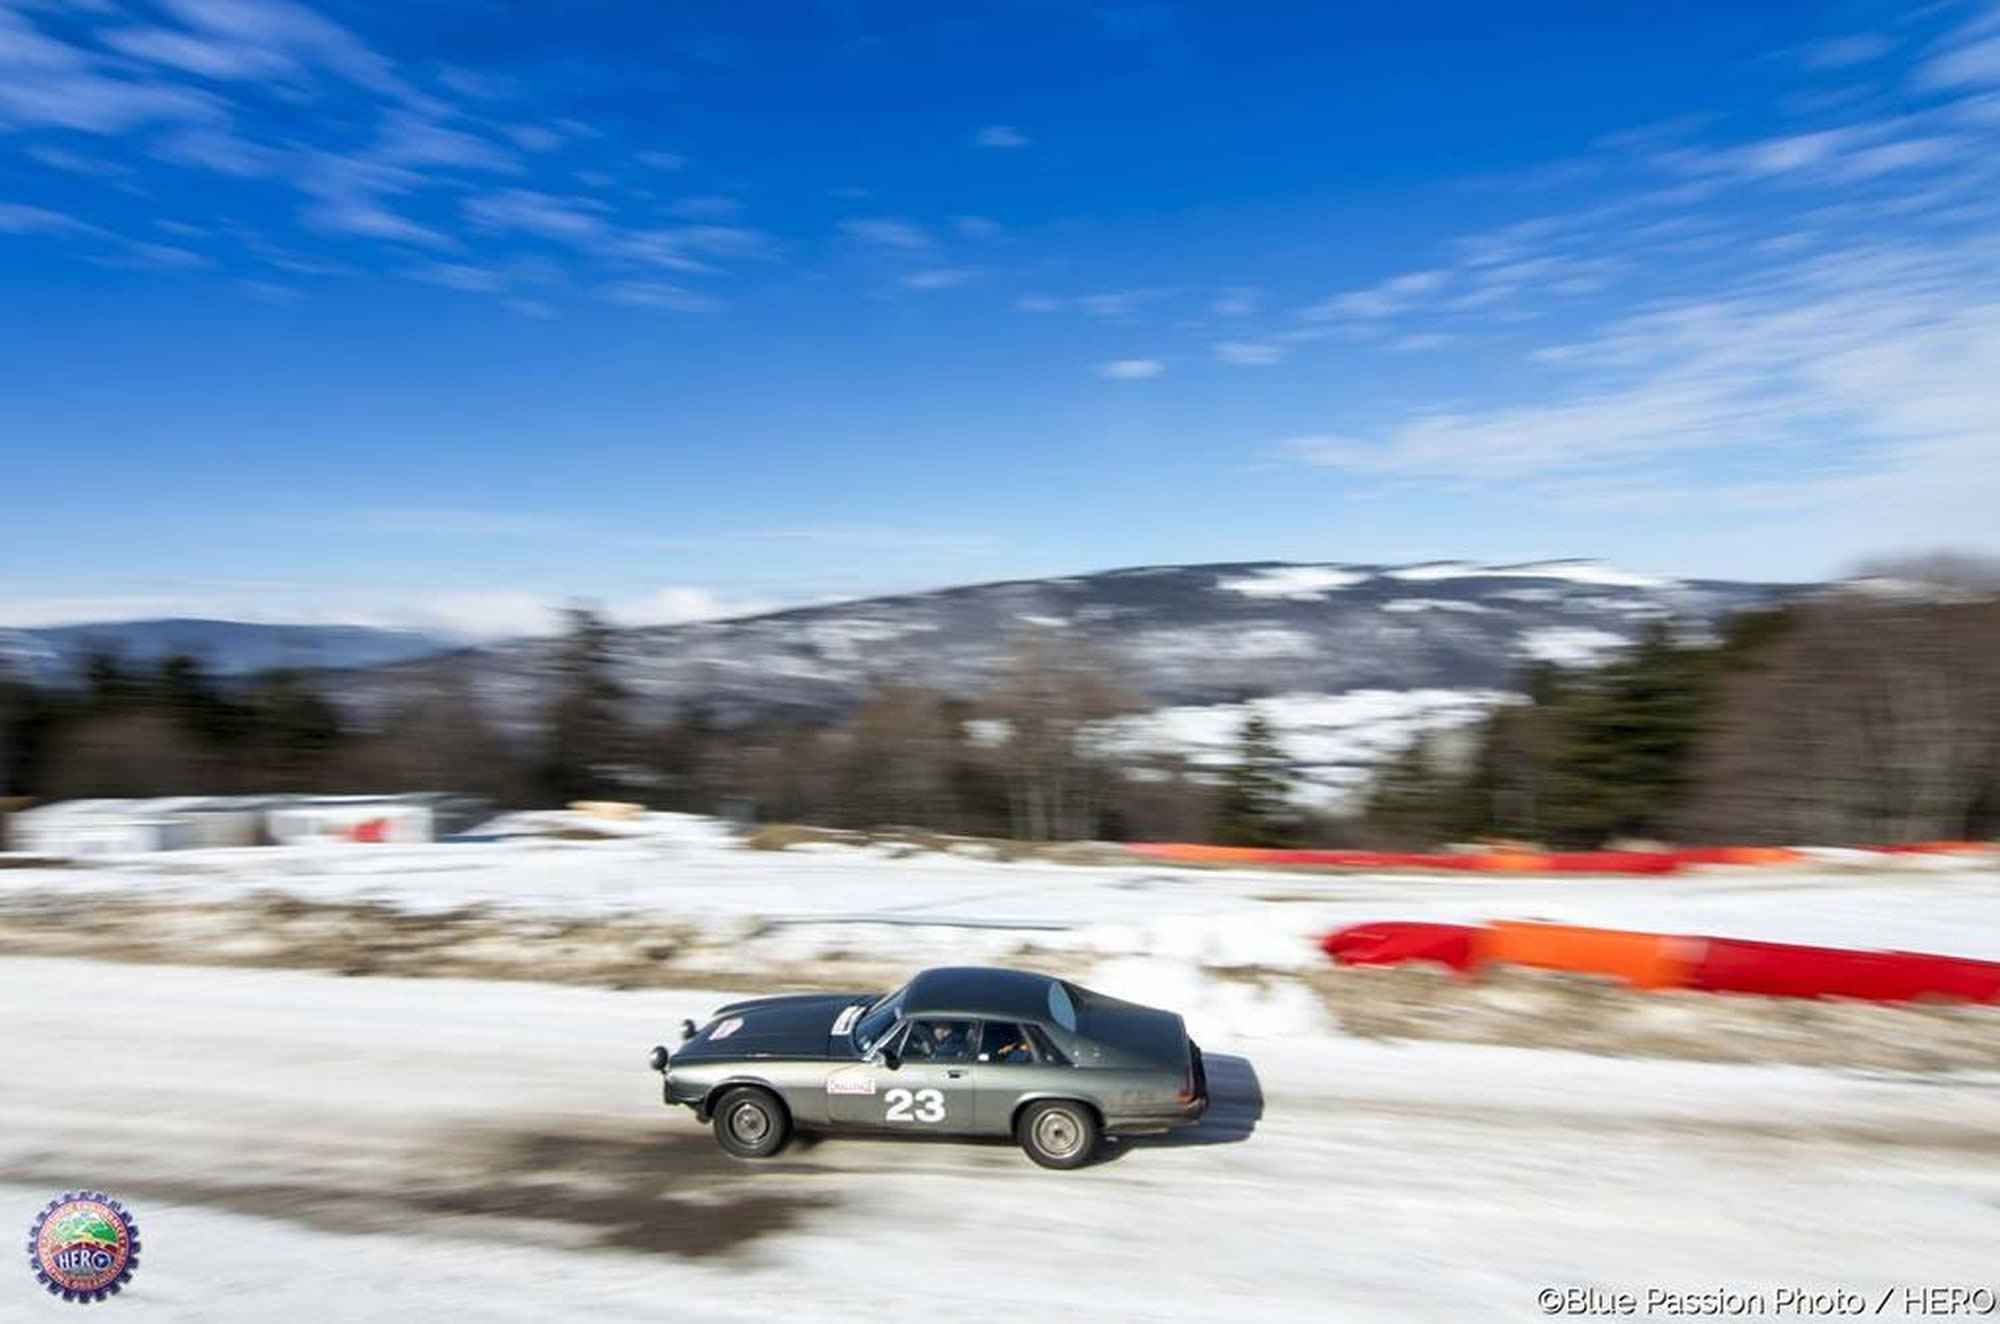 Ed and the XJ-S with navigator Pete Johnson at the Lans en Vercors ice racing circuit Rhone-Alpes France.